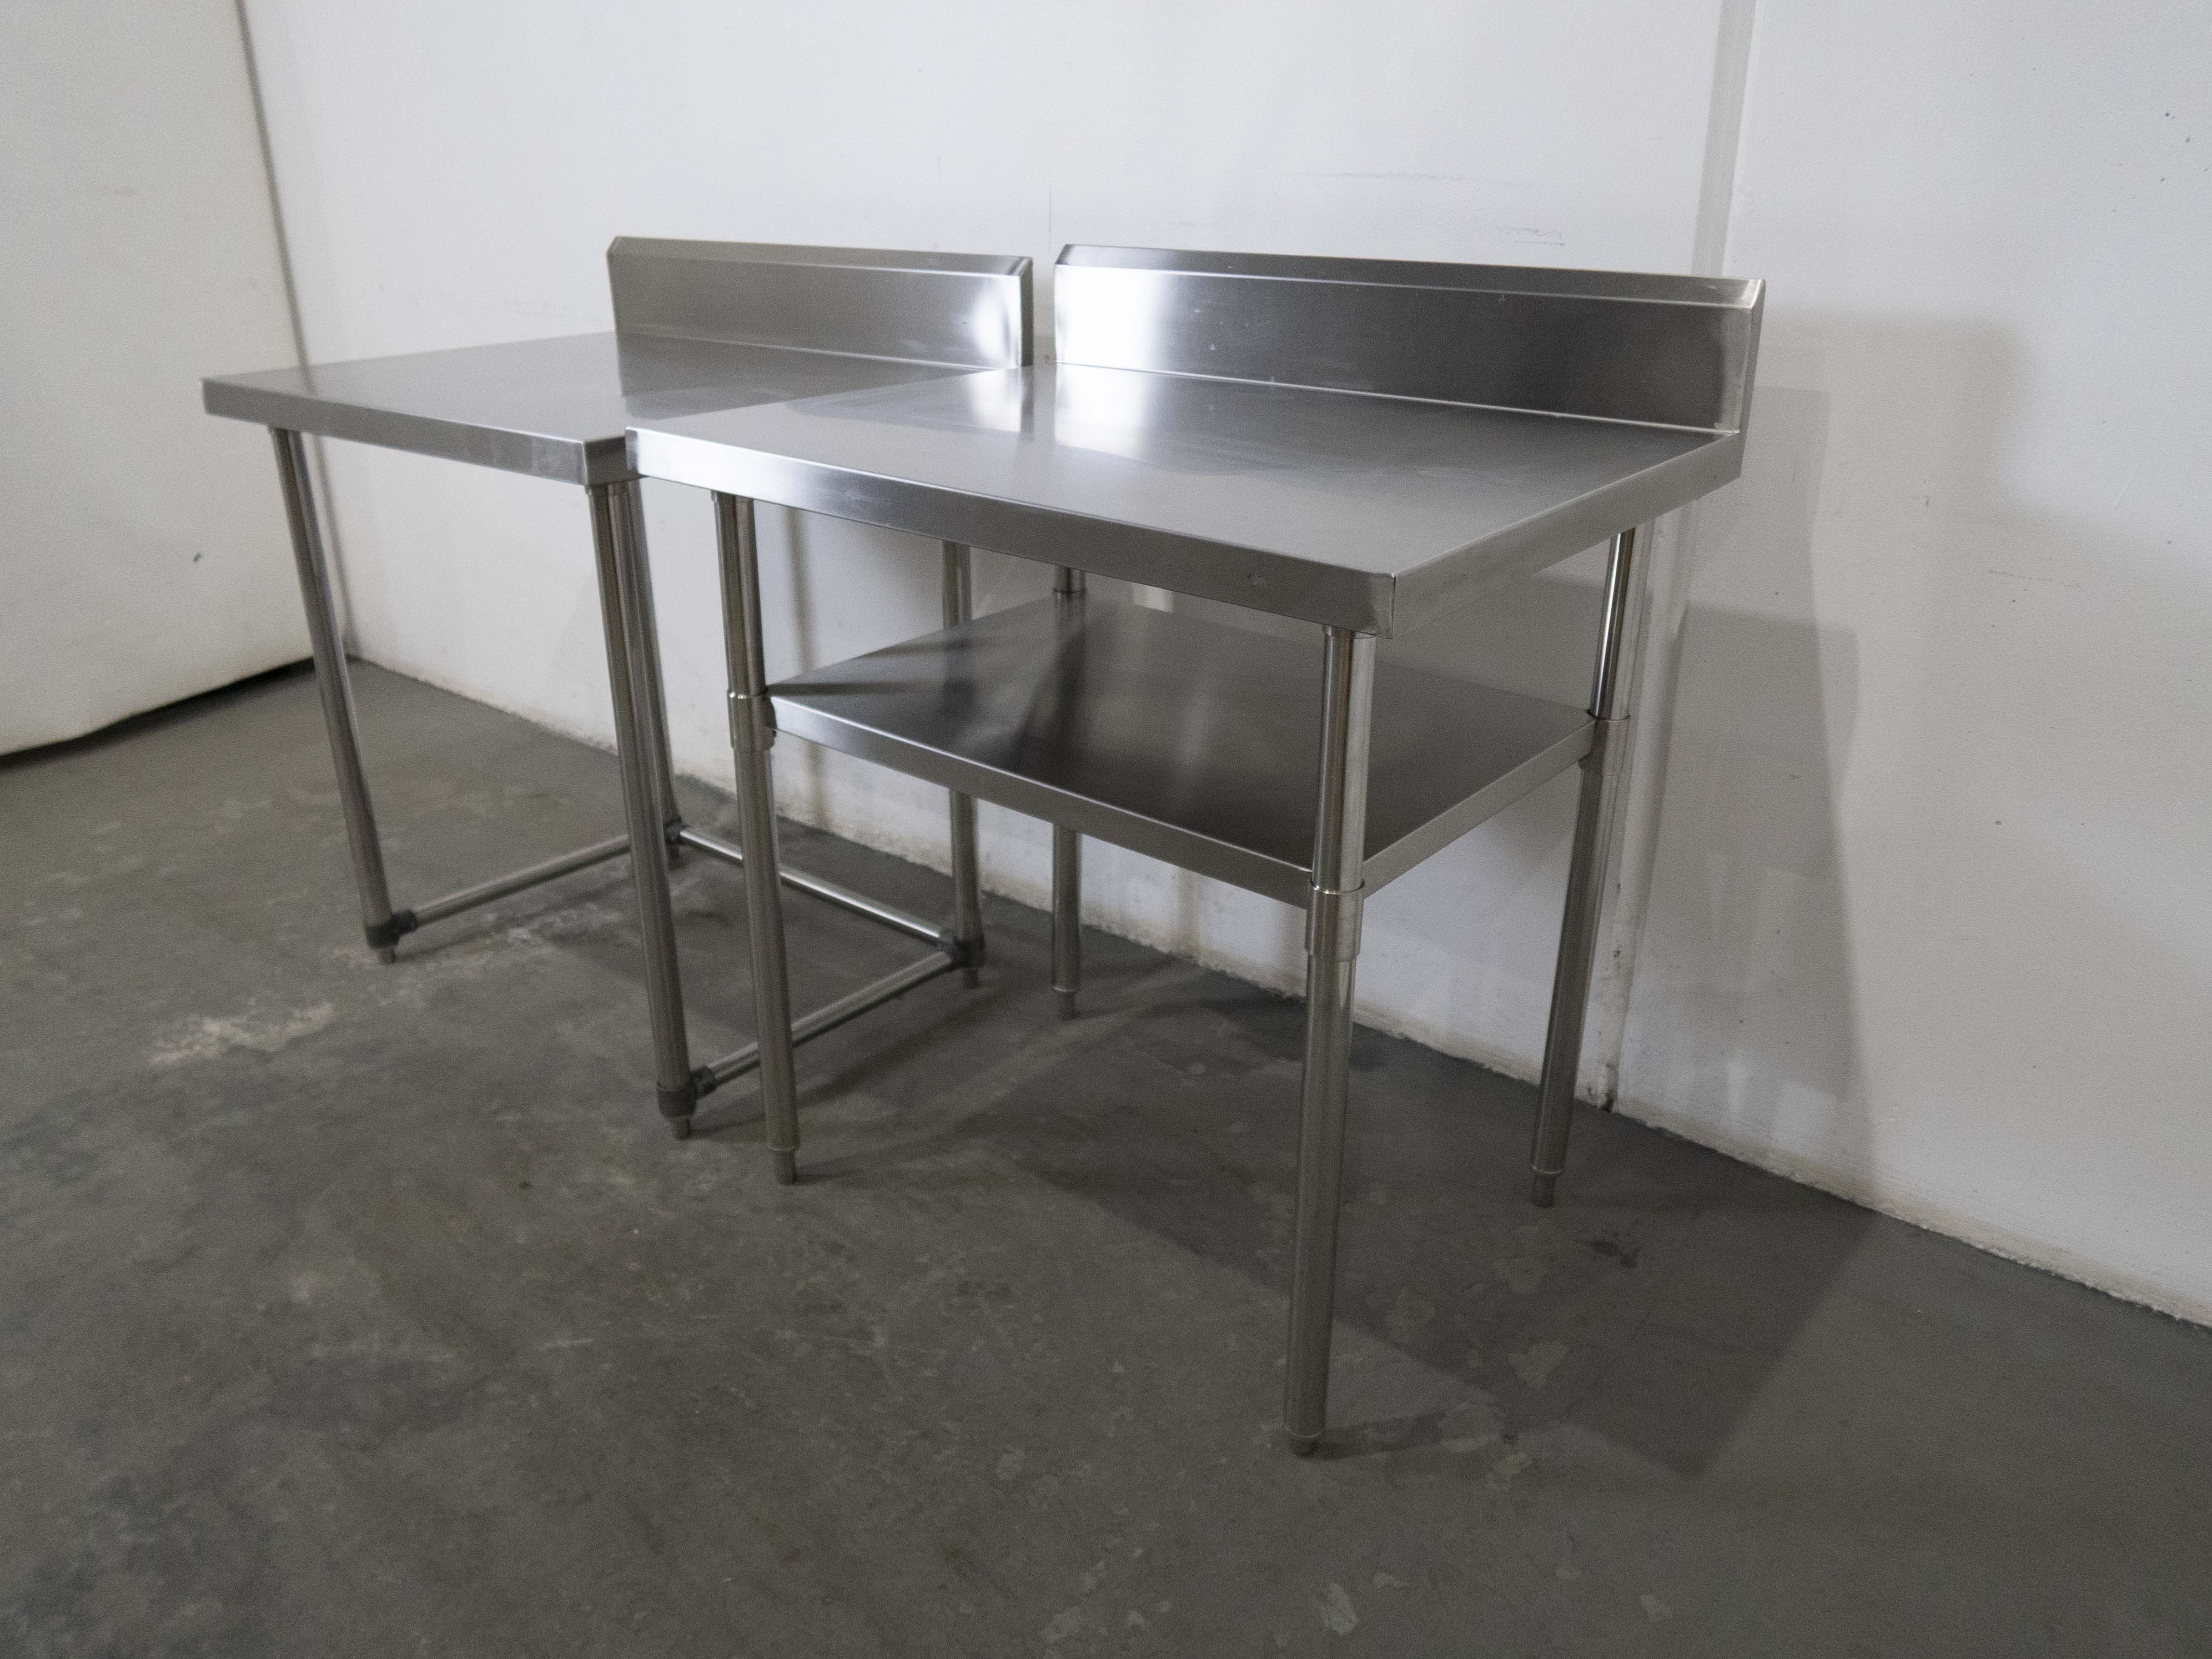 Thumbnail - Stainless Steel Work Benches x 2